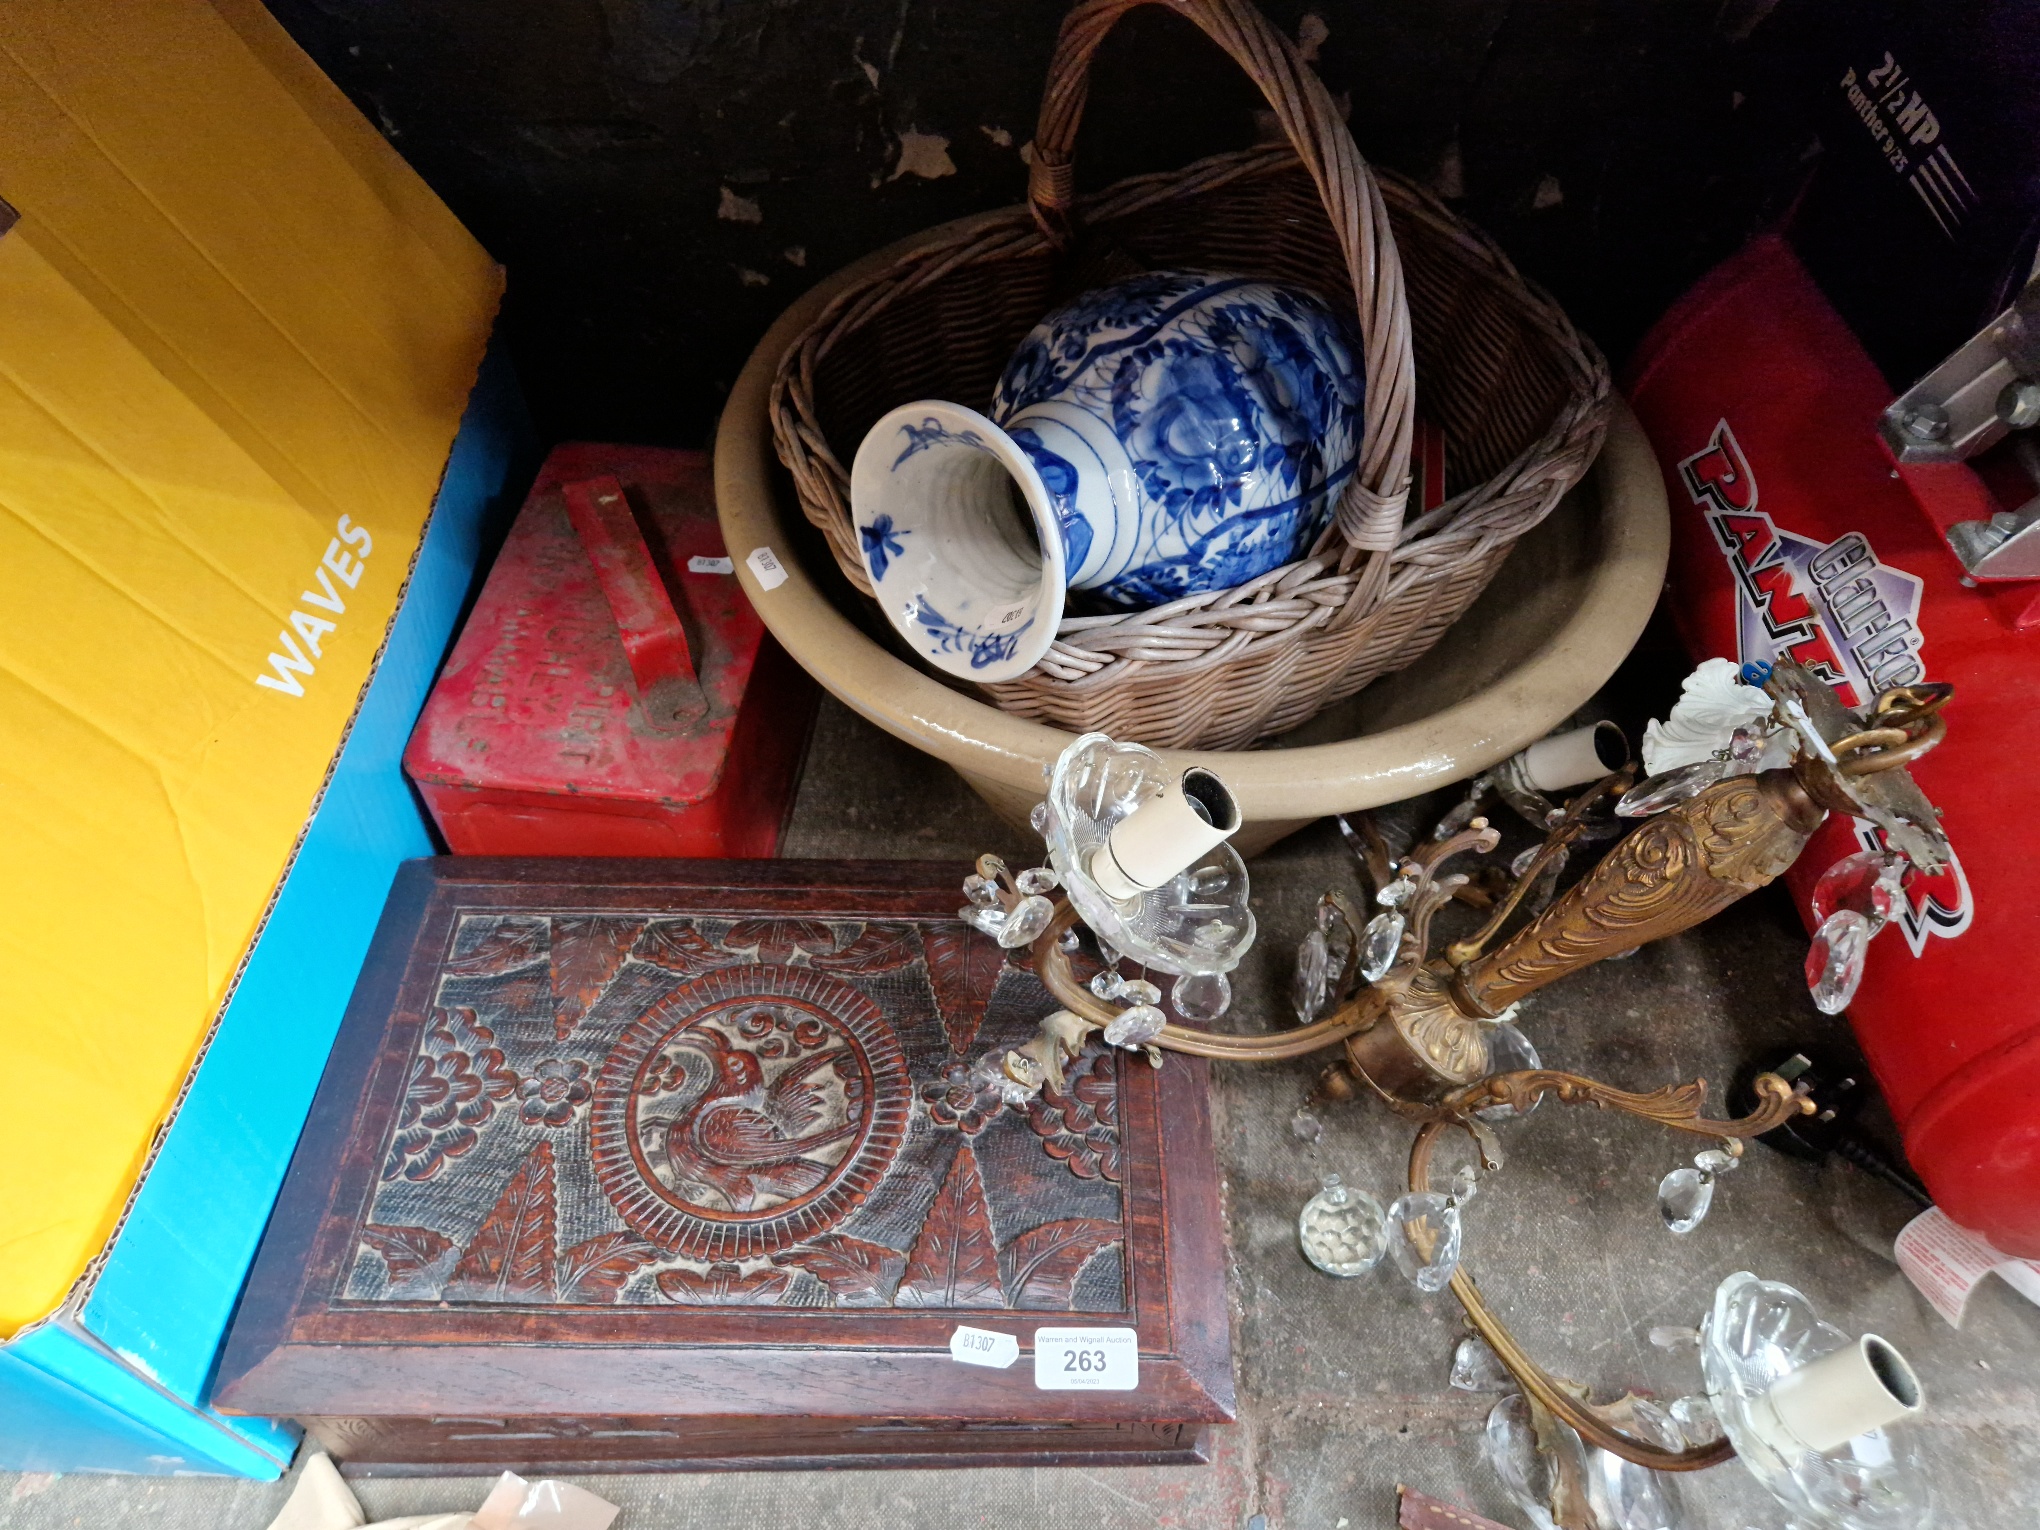 A mixed lot including a carved wooden box, a Japanese arita vase, a ceiling light fitting, metal